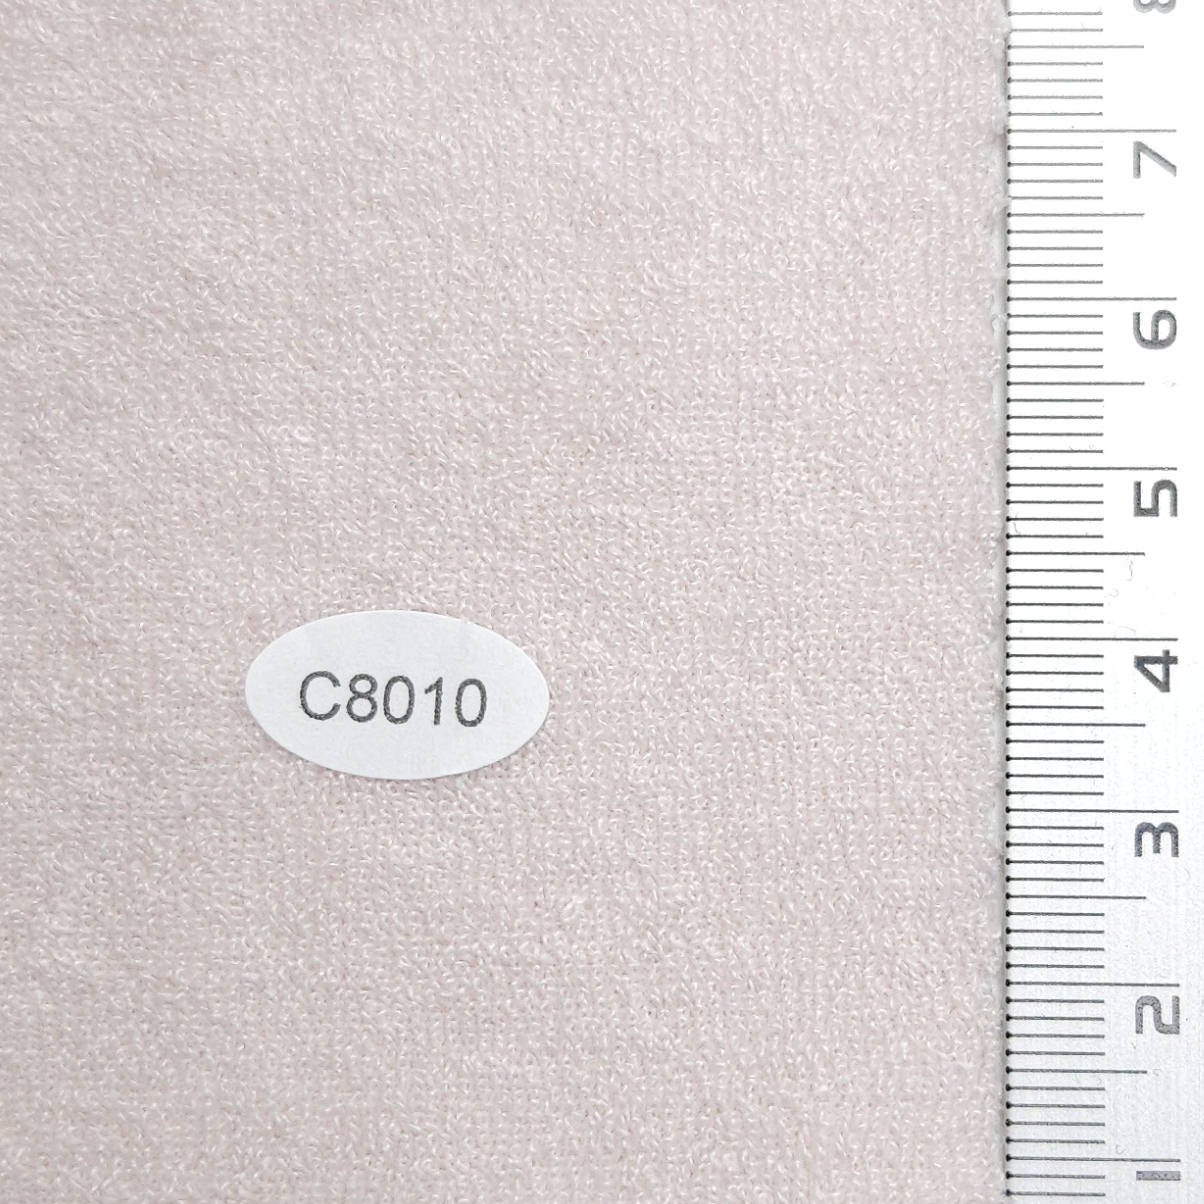 Terry Polyester Rayon Knit Fabric | FAB1467 | 1, 2, 3, 4, 5, 6, 7, 8, 9, 10 by Fabricis.com #